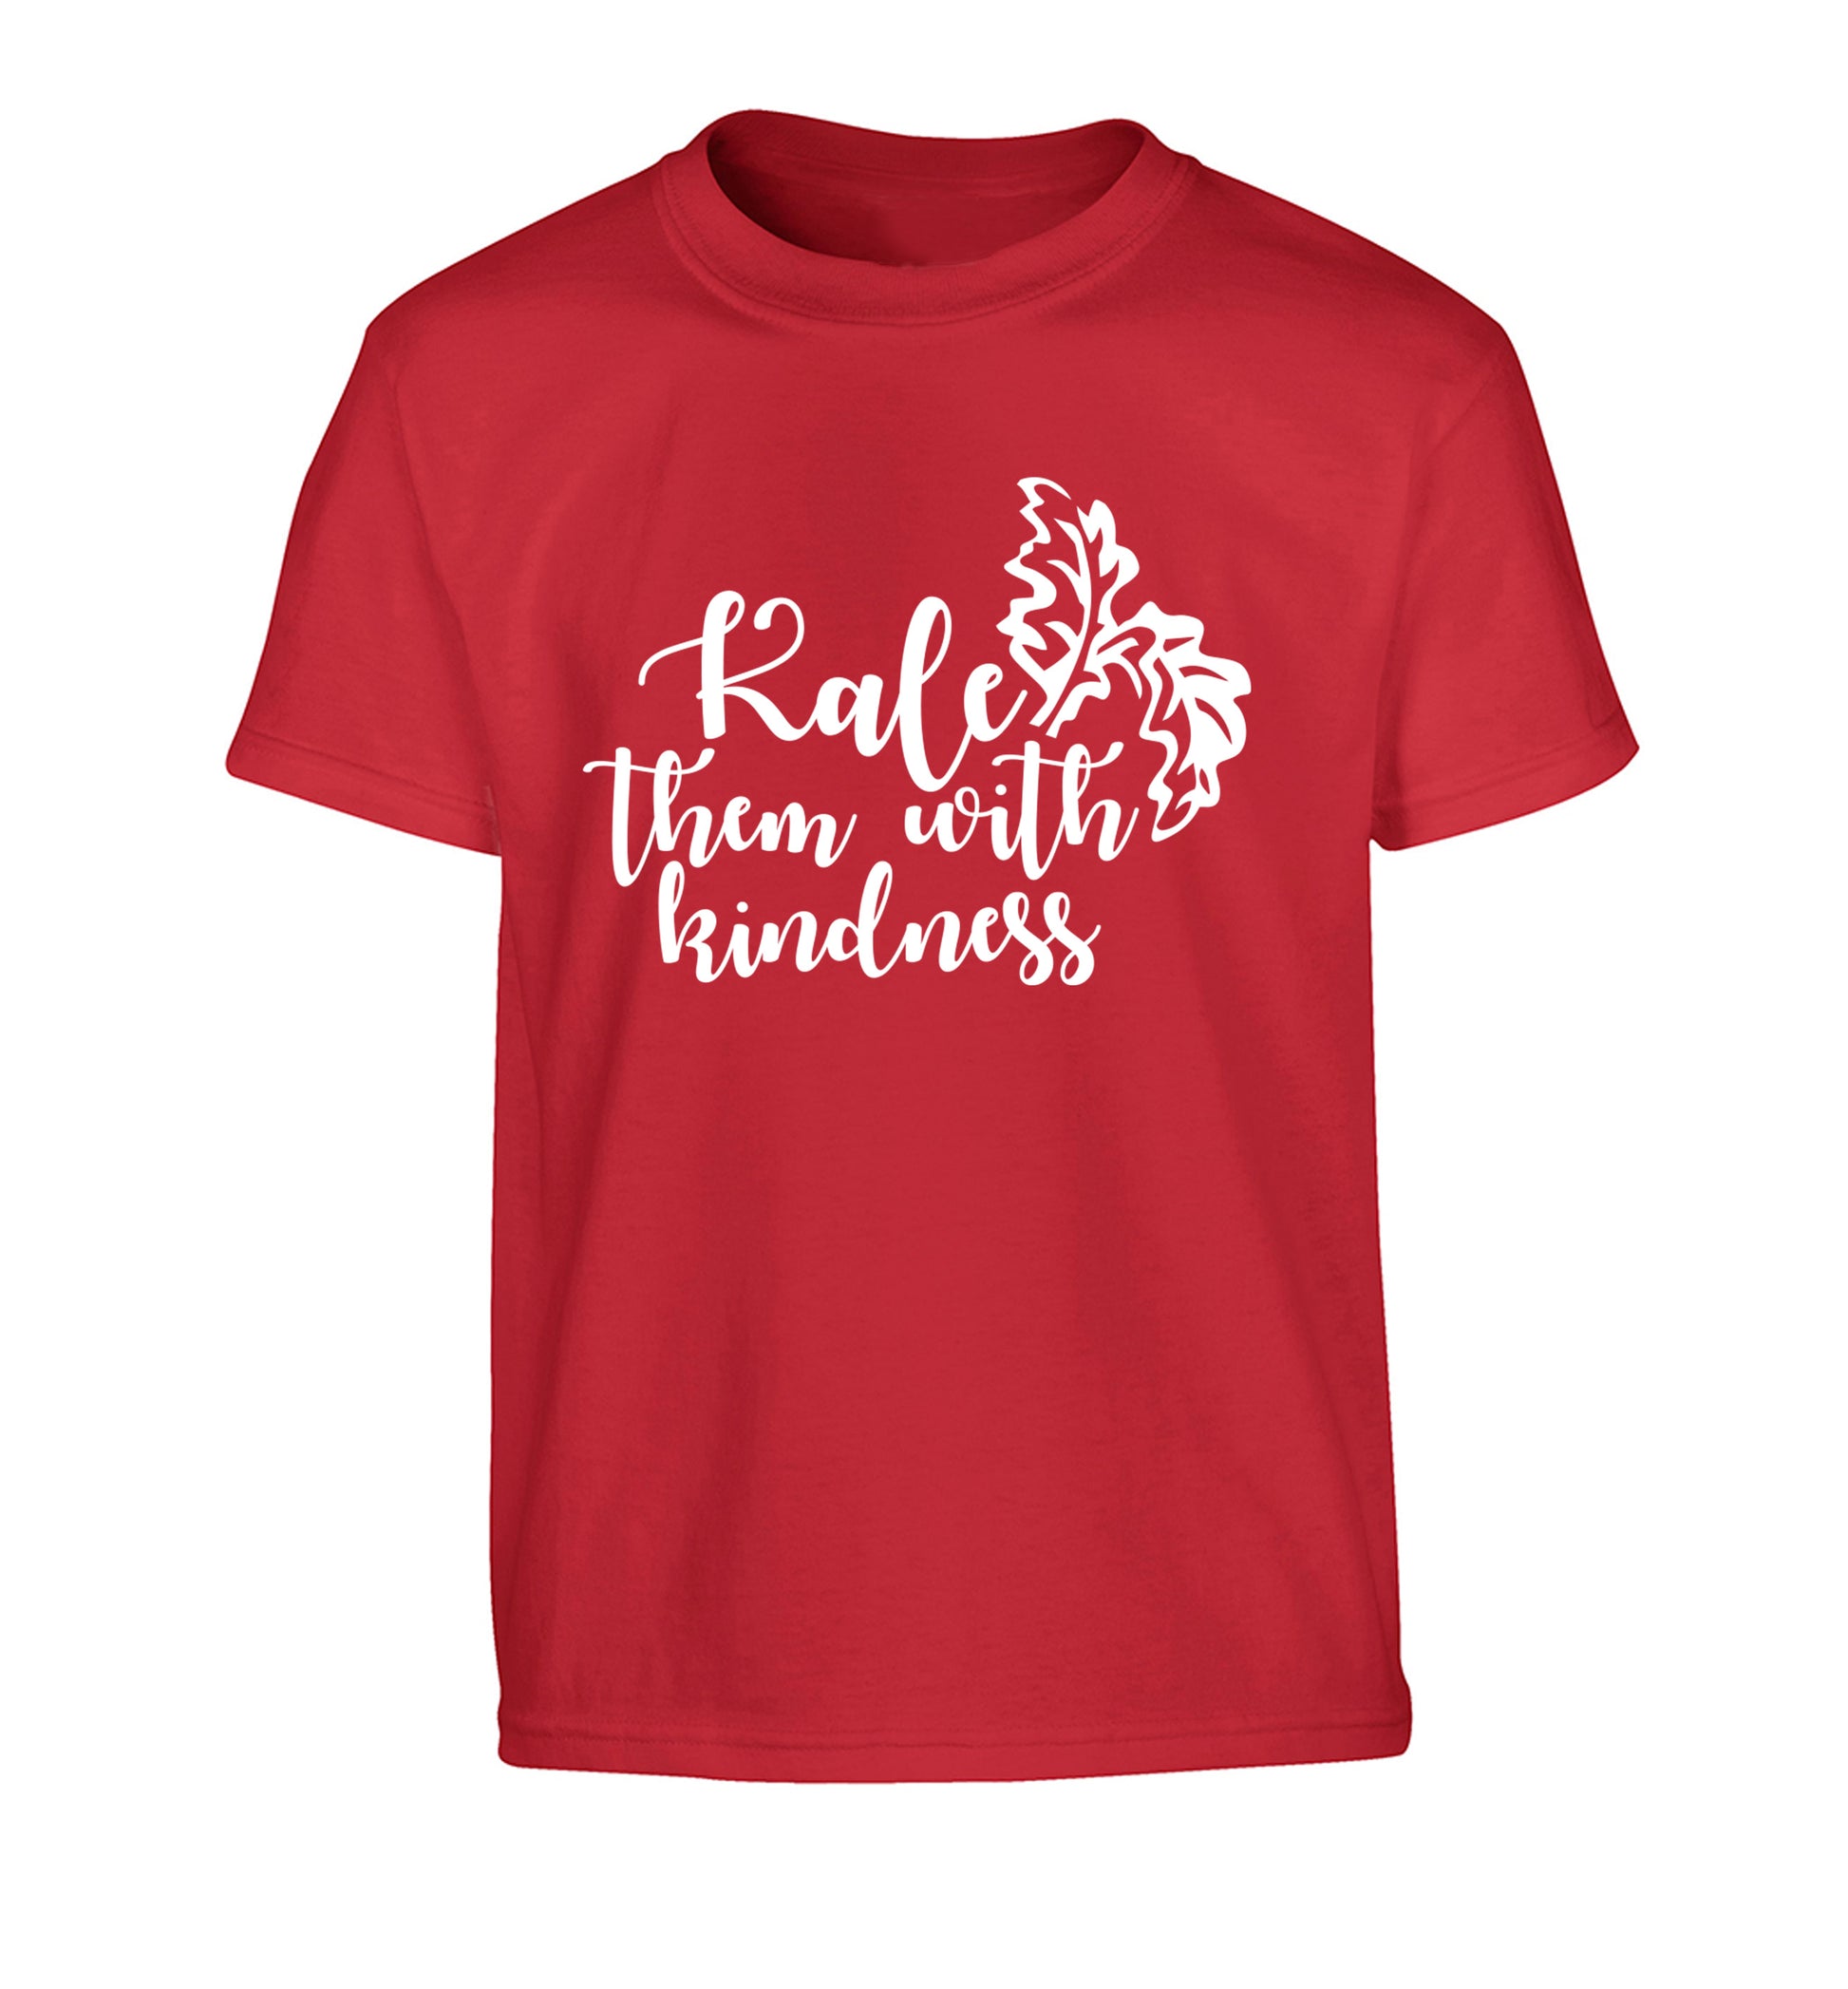 Kale them with kindness Children's red Tshirt 12-14 Years